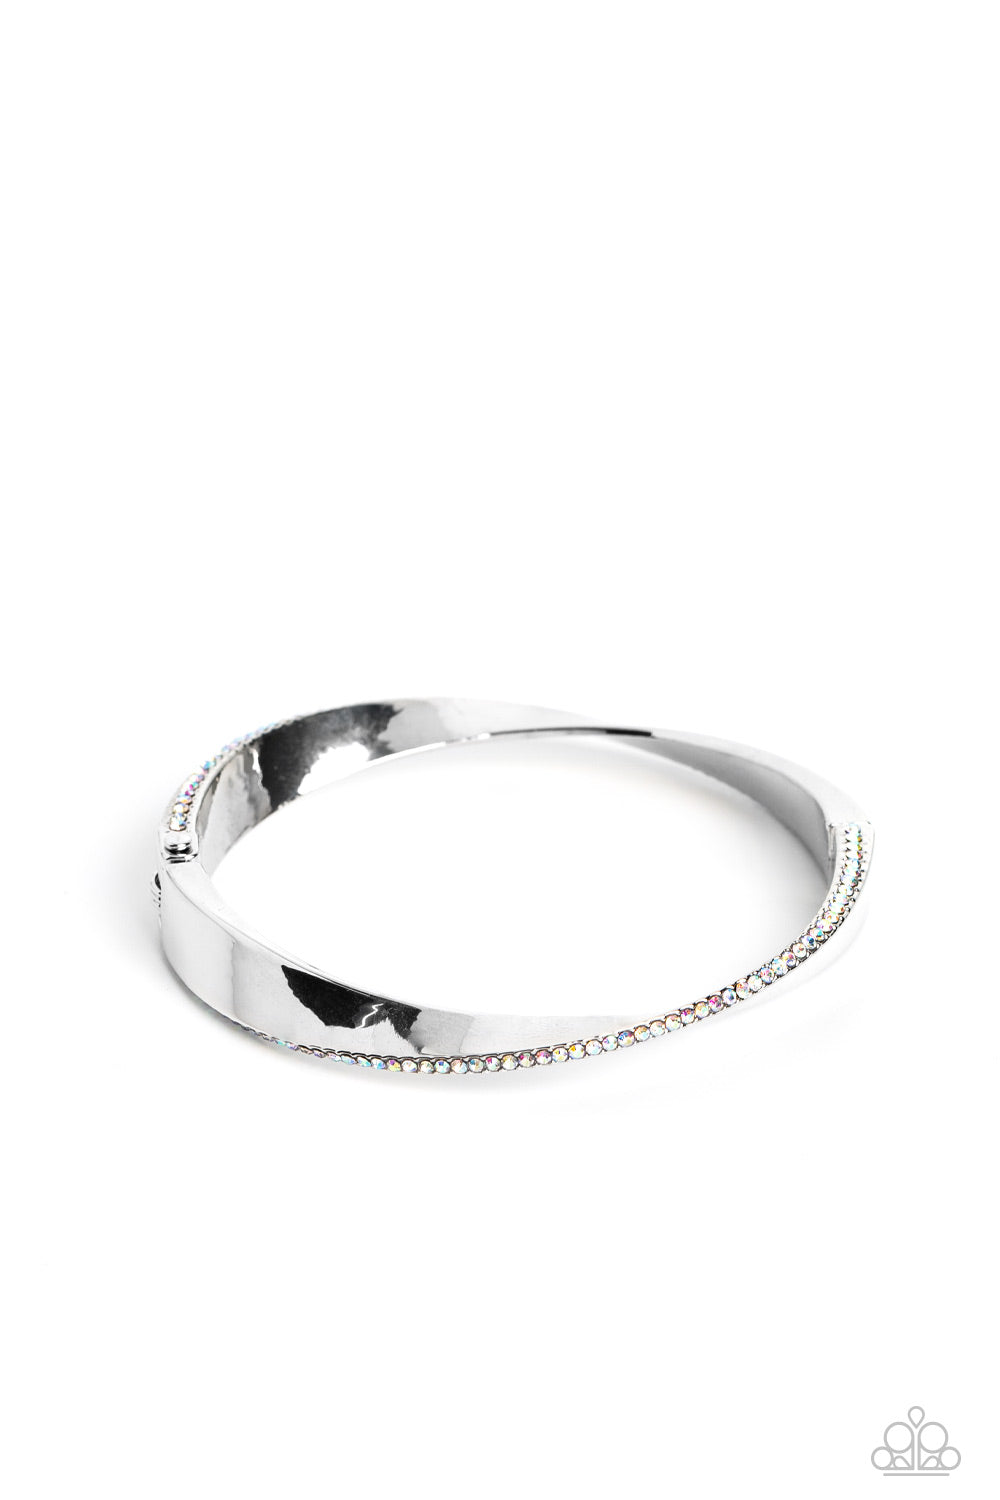 Artistically Adorned - Multi Iridescent - Silver Bracelet - Paparazzi Accessories - An oversized, warped, shiny silver bracelet wraps around the wrist in an artistic manner. A dainty row of iridescent rhinestones encrusts along the curves for an understated, elegant dazzle. Features a hinged closure. Sold as one individual bracelet.